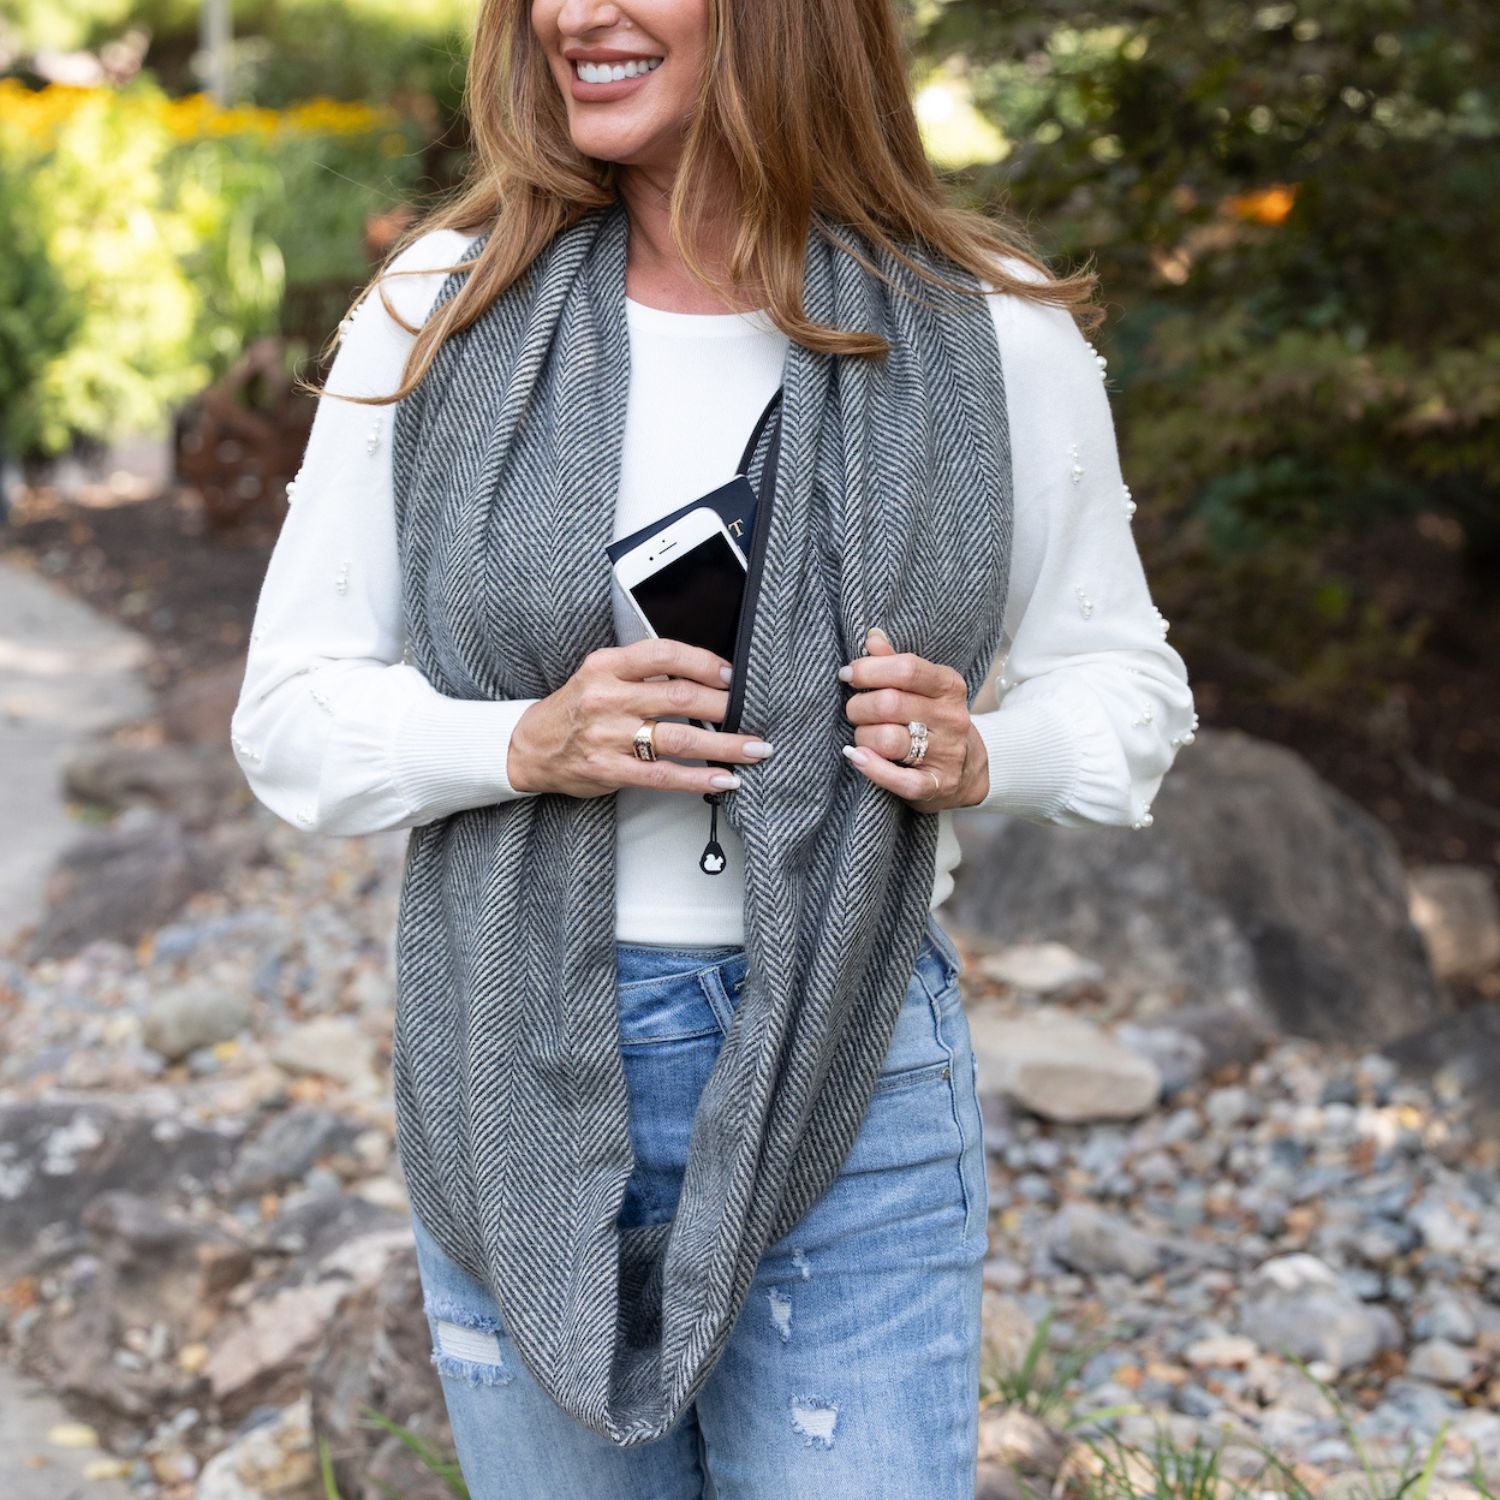 SHOLDIT Infinity Scarf with Pocket™ shown long with phone and passport